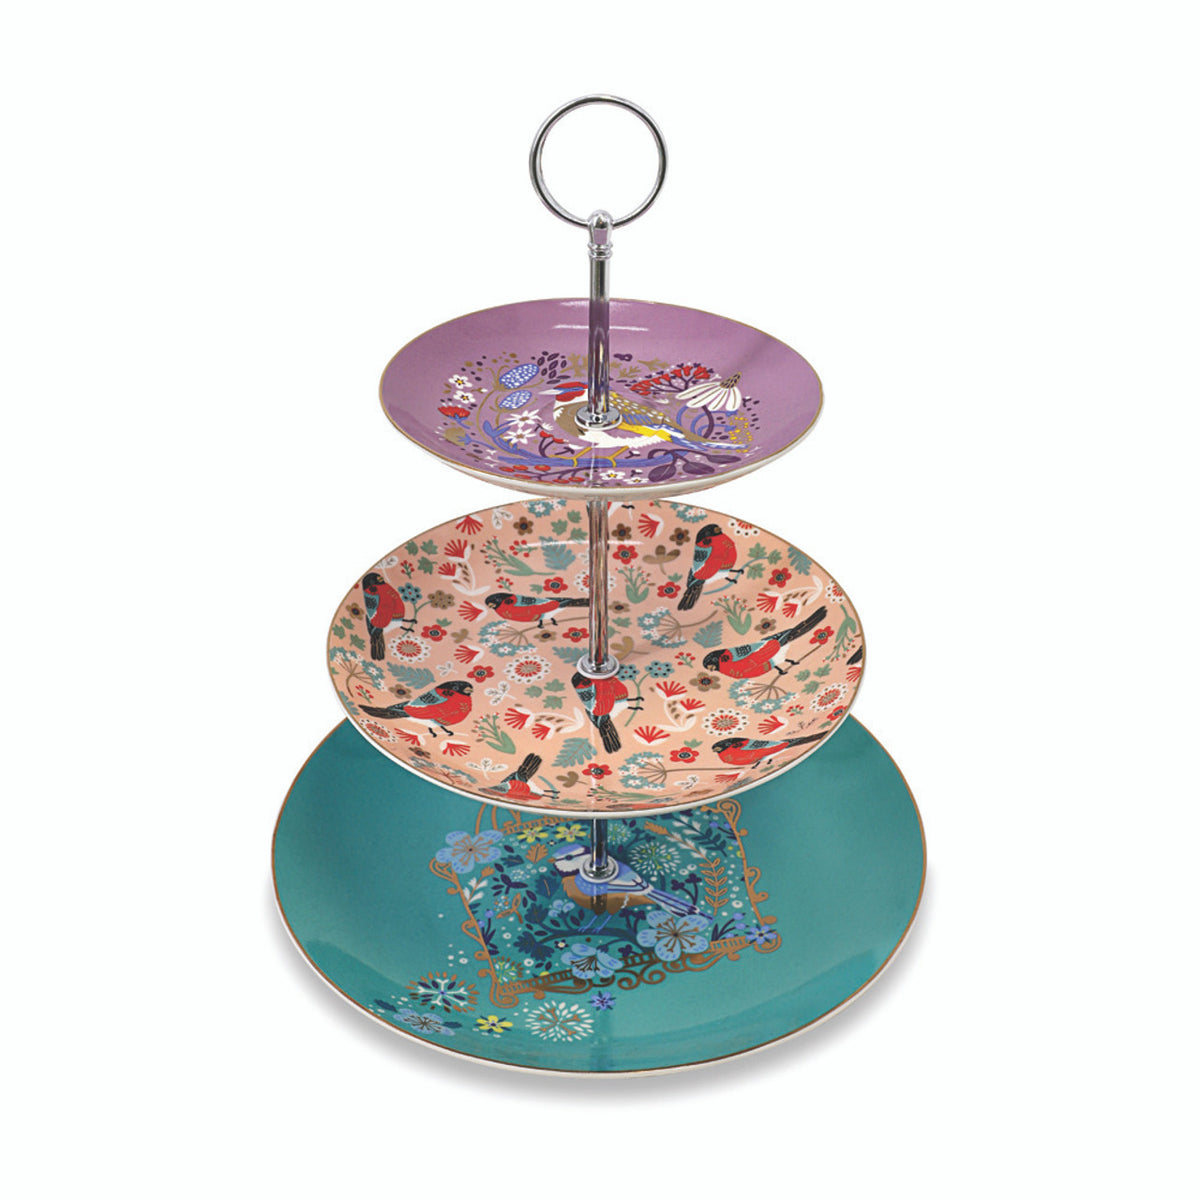 Birdy Cake Stand from Tipperary Crystal